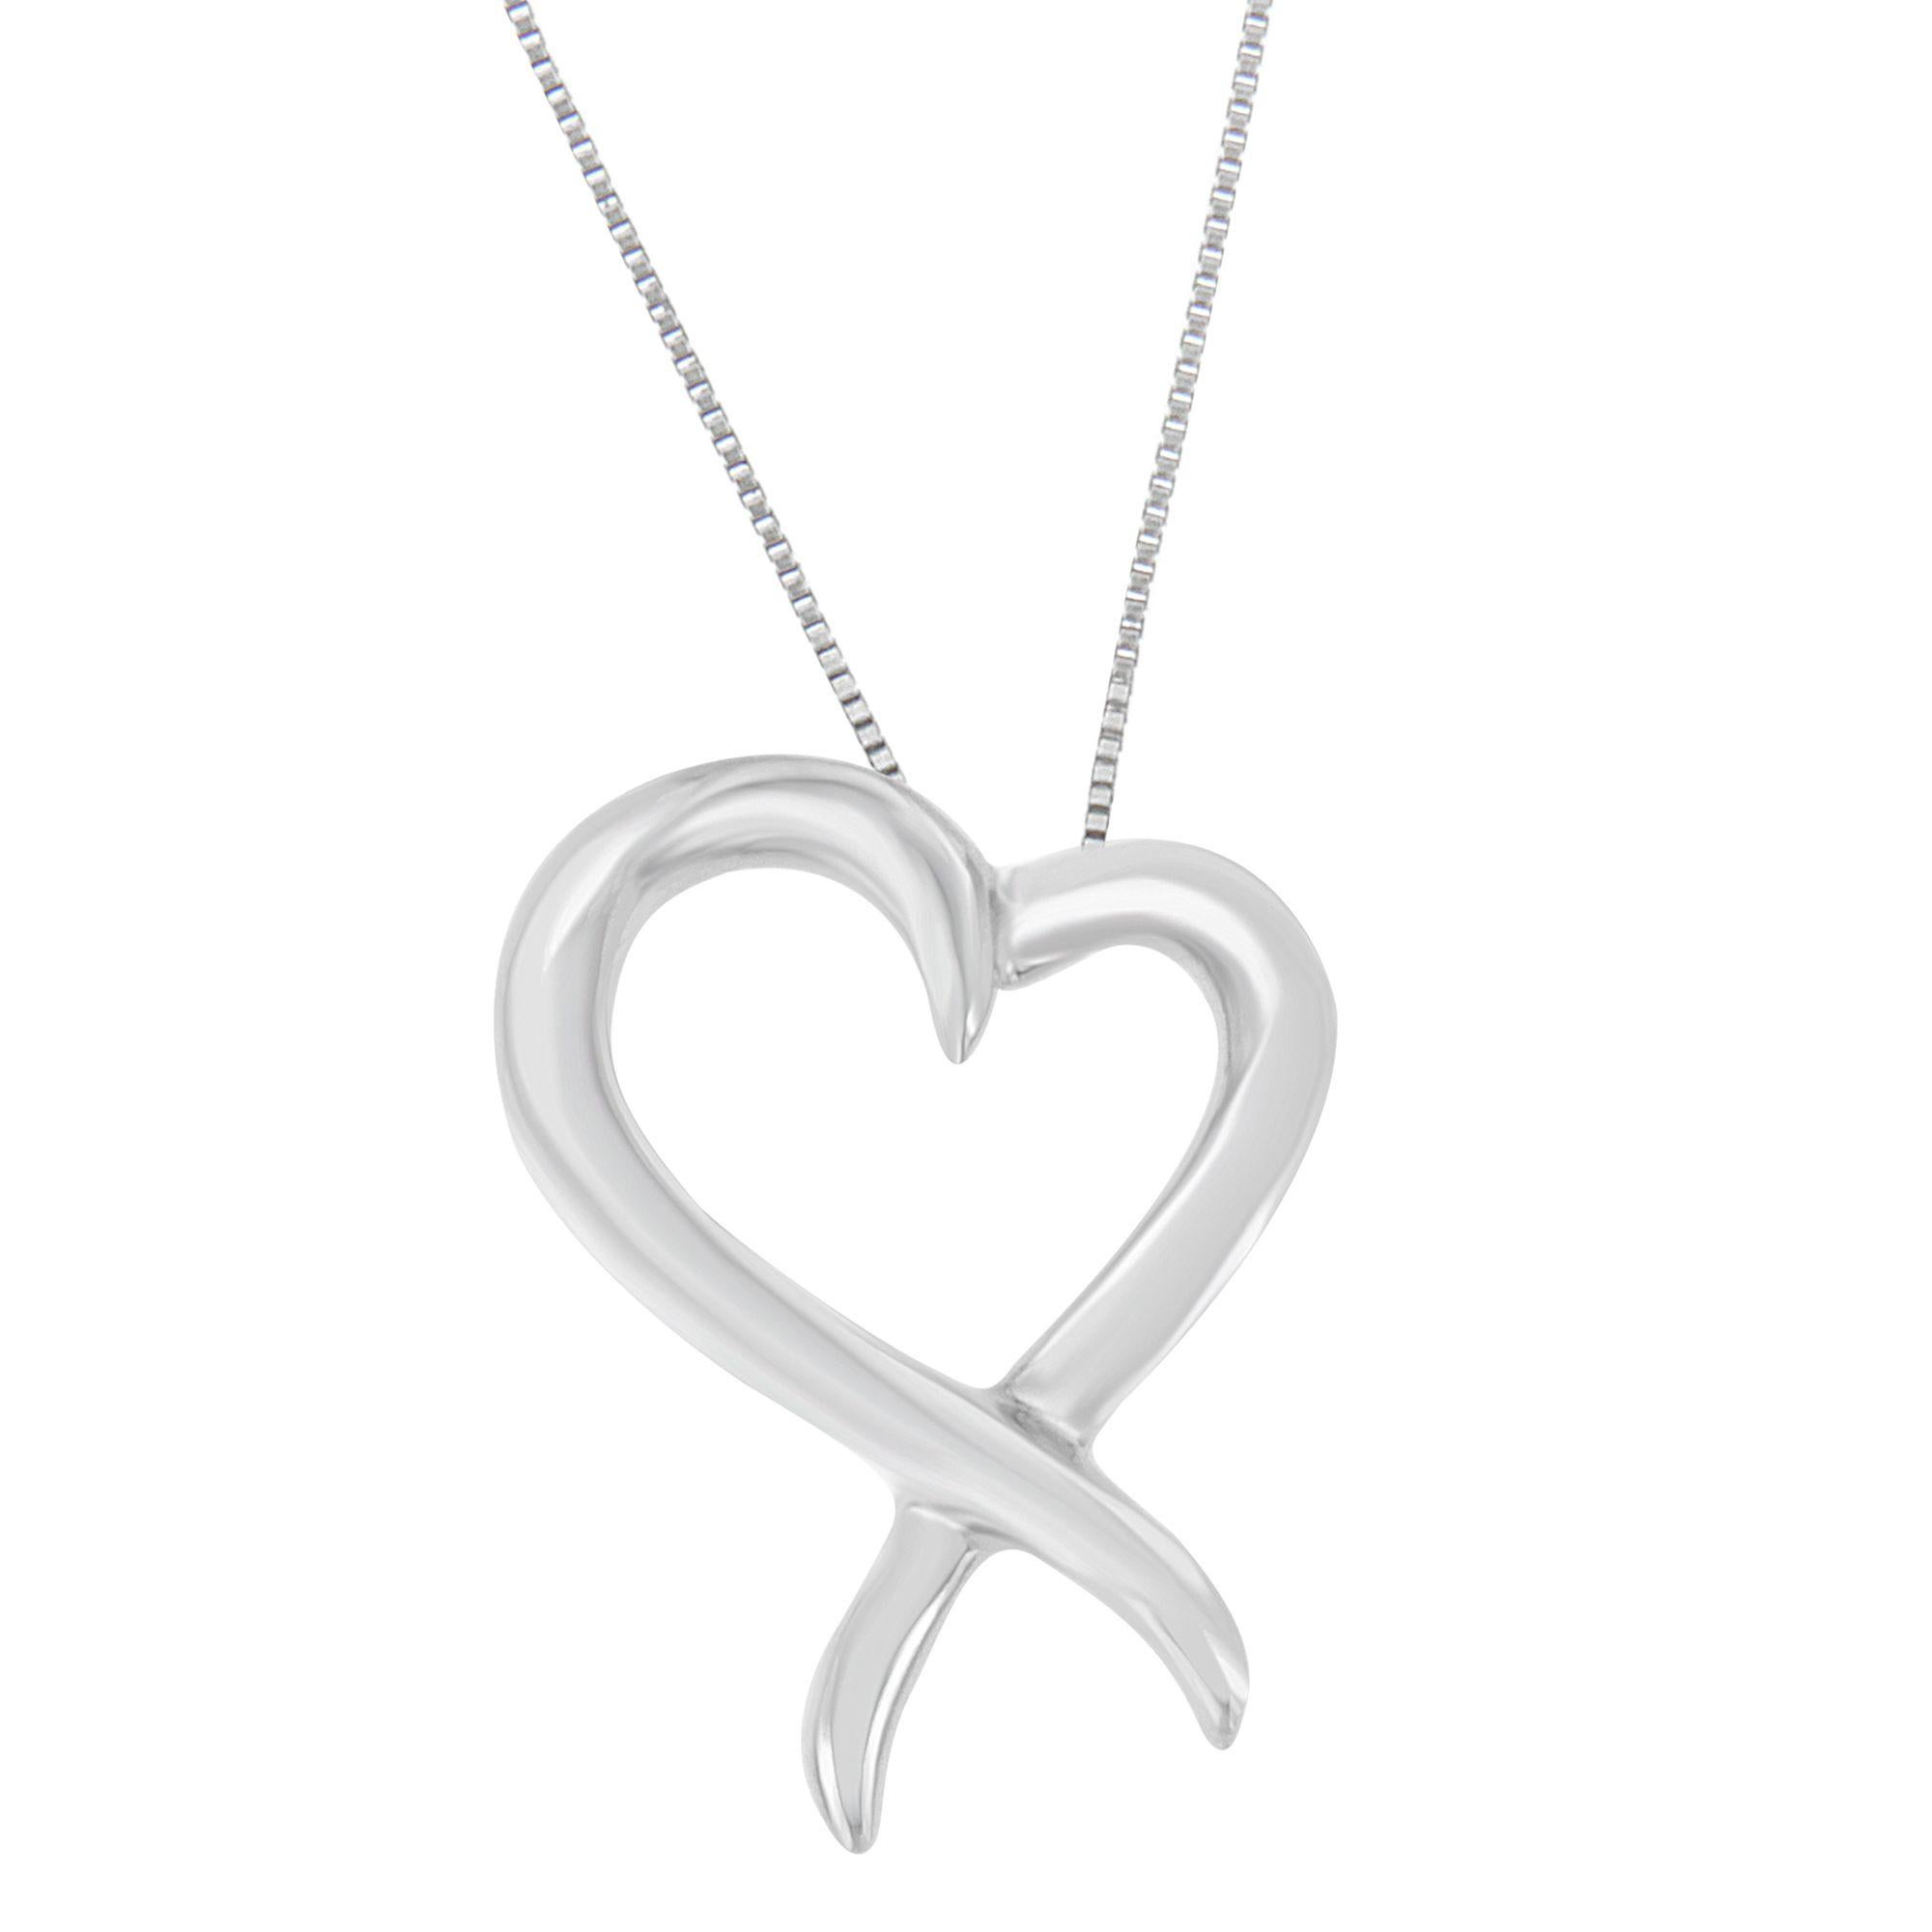 With its simple yet graceful design, this heart-shaped pendant can be worn every day. Crafted in fine sterling silver and overlapped at the bottom for an elegant flourish, it's a wonderful gift to let her know she has your heart forever.

Product